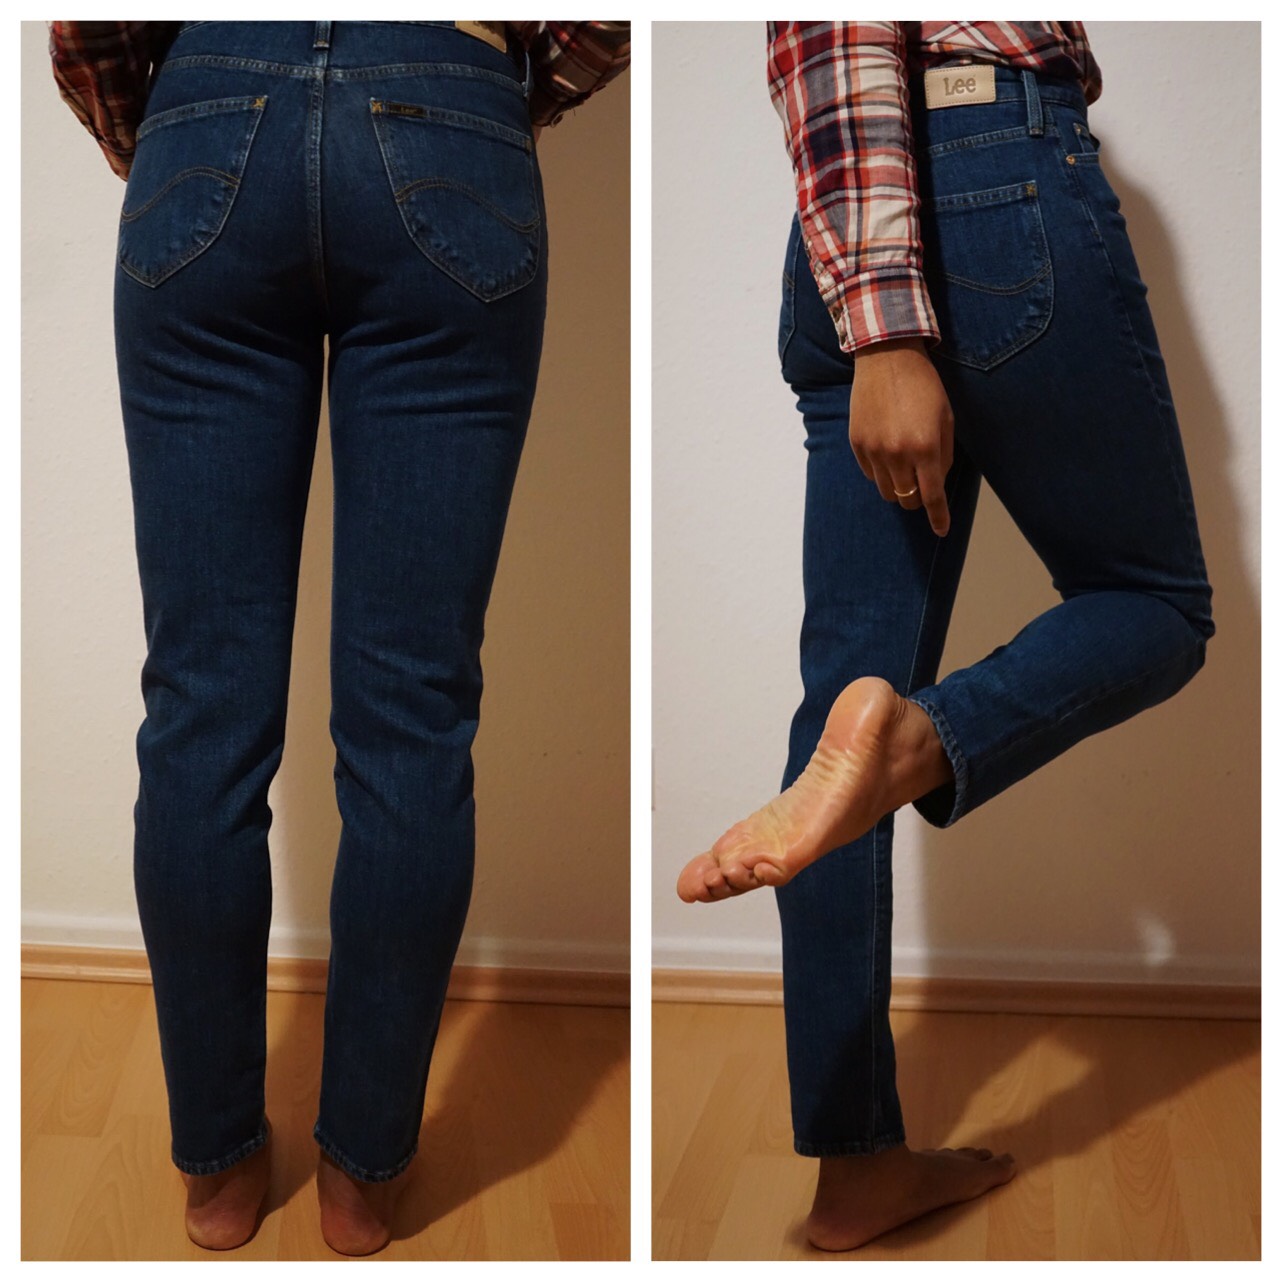 lee jeans mom fit